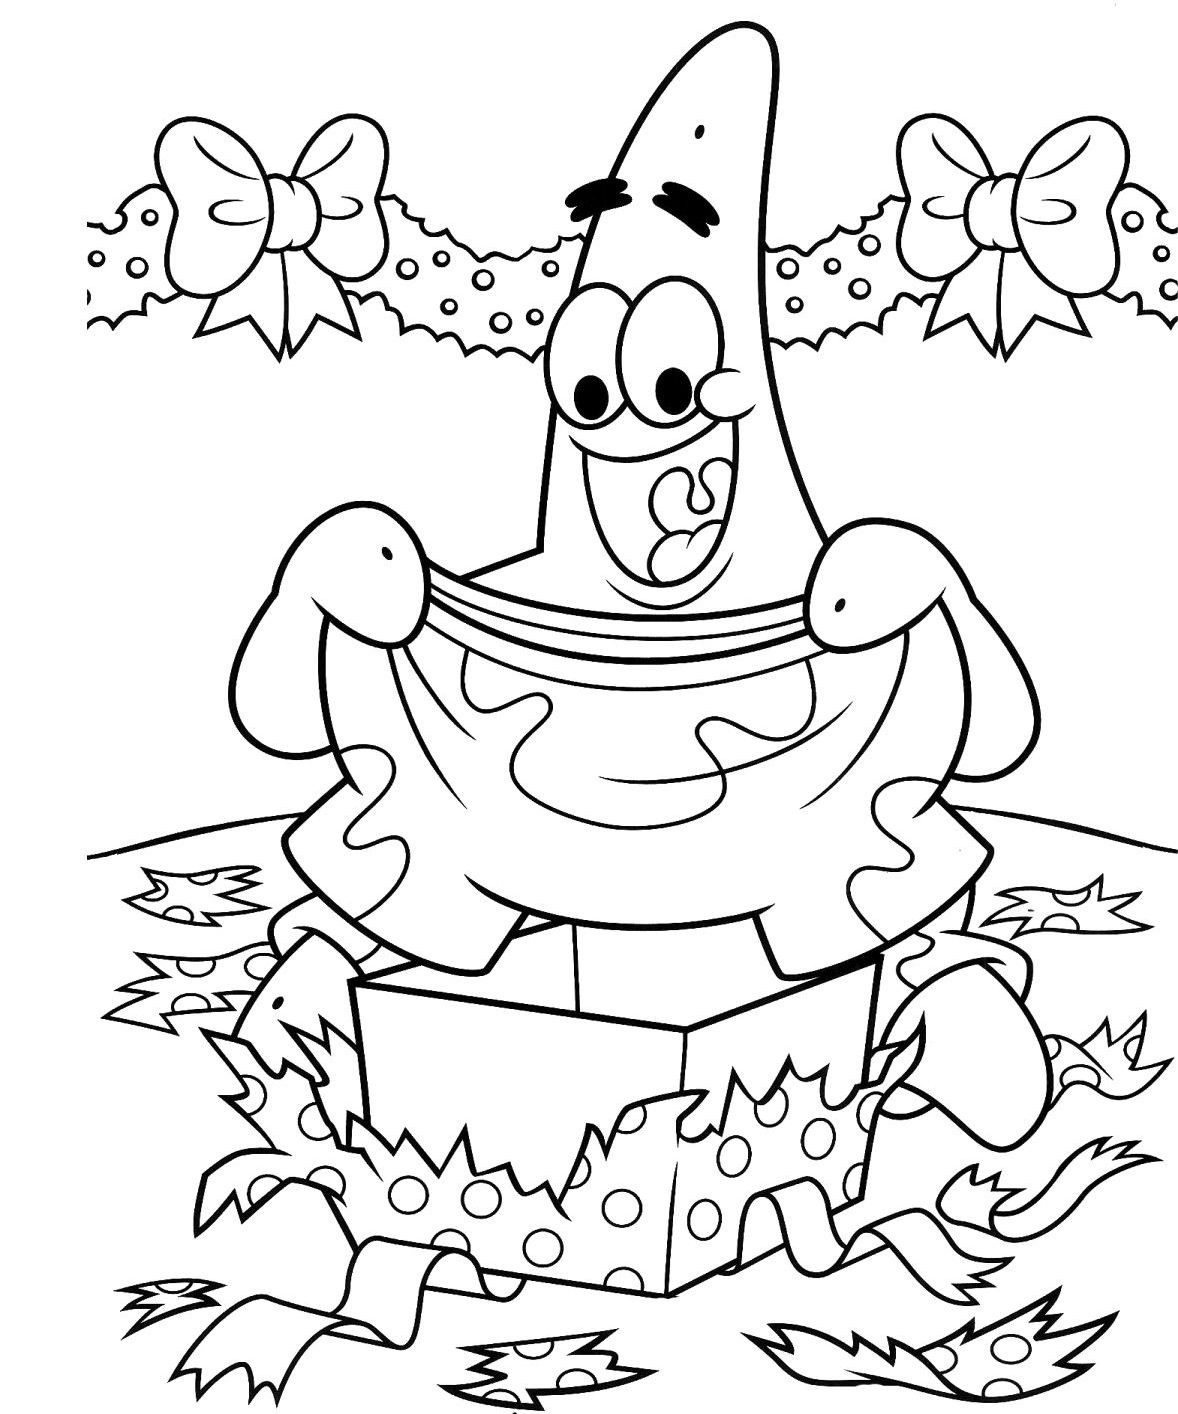 Christmas Coloring Pages For Boys
 Spongebob Christmas Coloring Pages Coloring Home